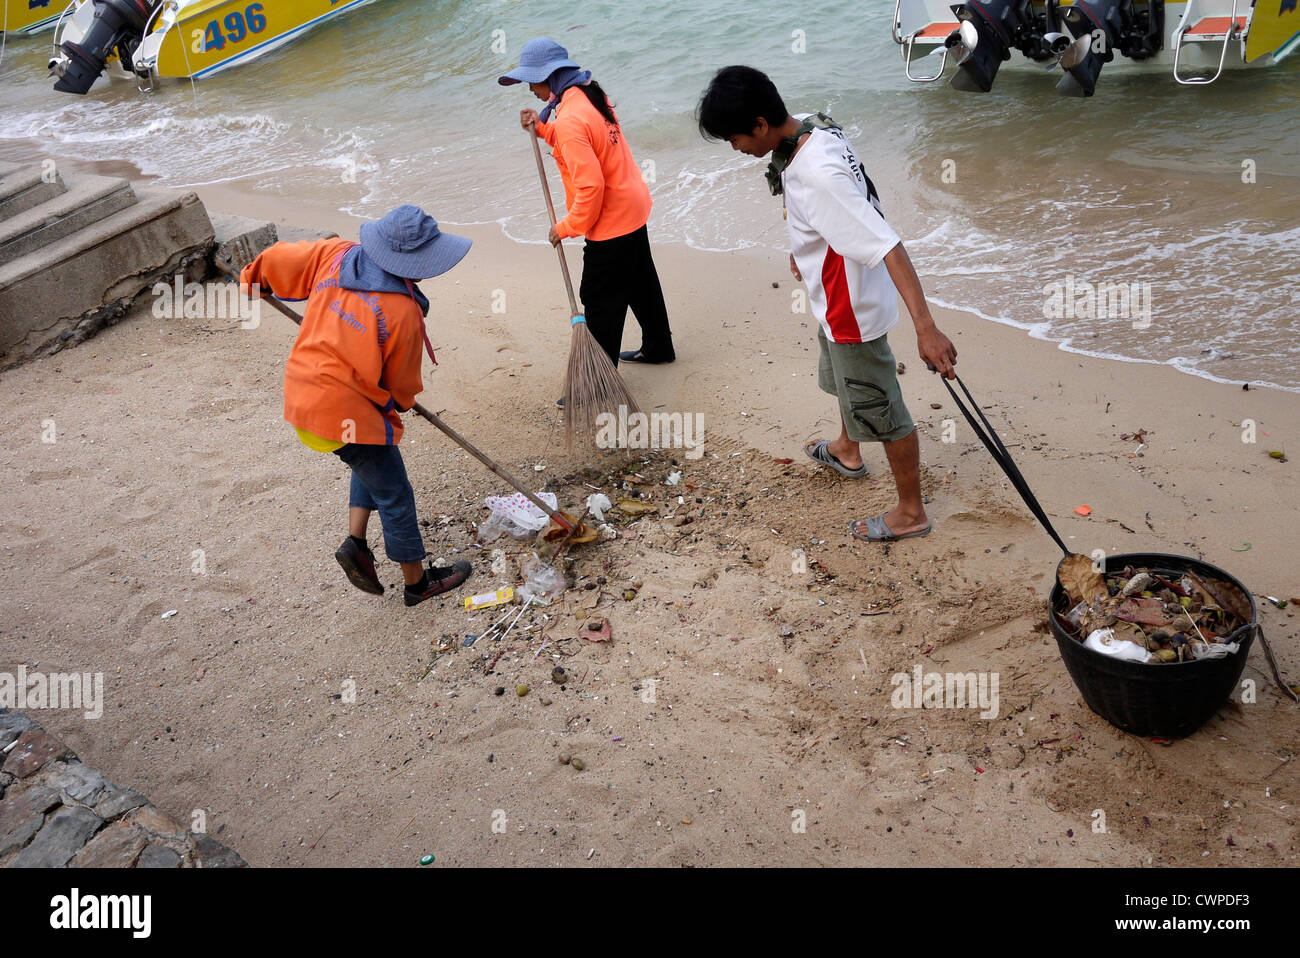 Beach cleaners sweep and clear rubbish from the beach in Pattaya Thailand Stock Photo